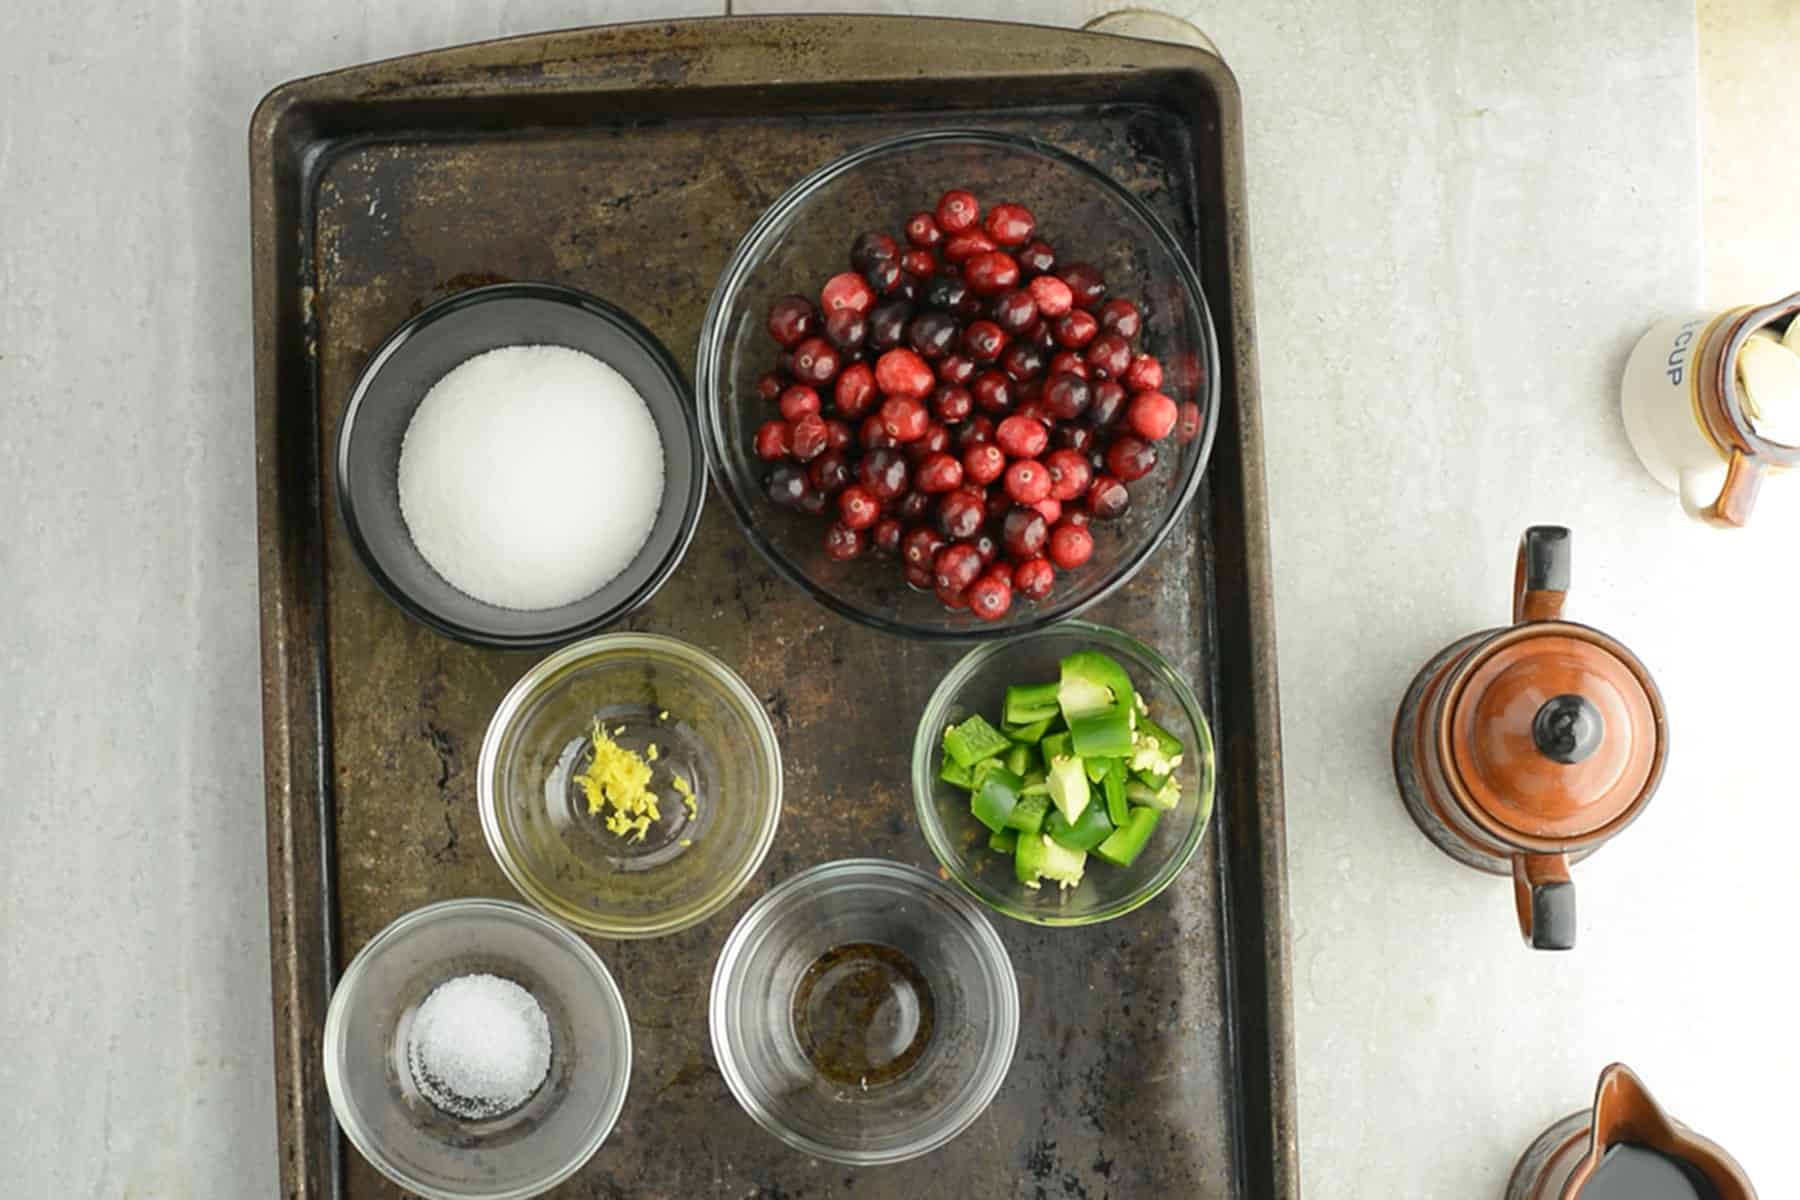 cranberry, jalapeno, and other ingredients are placed in a tray